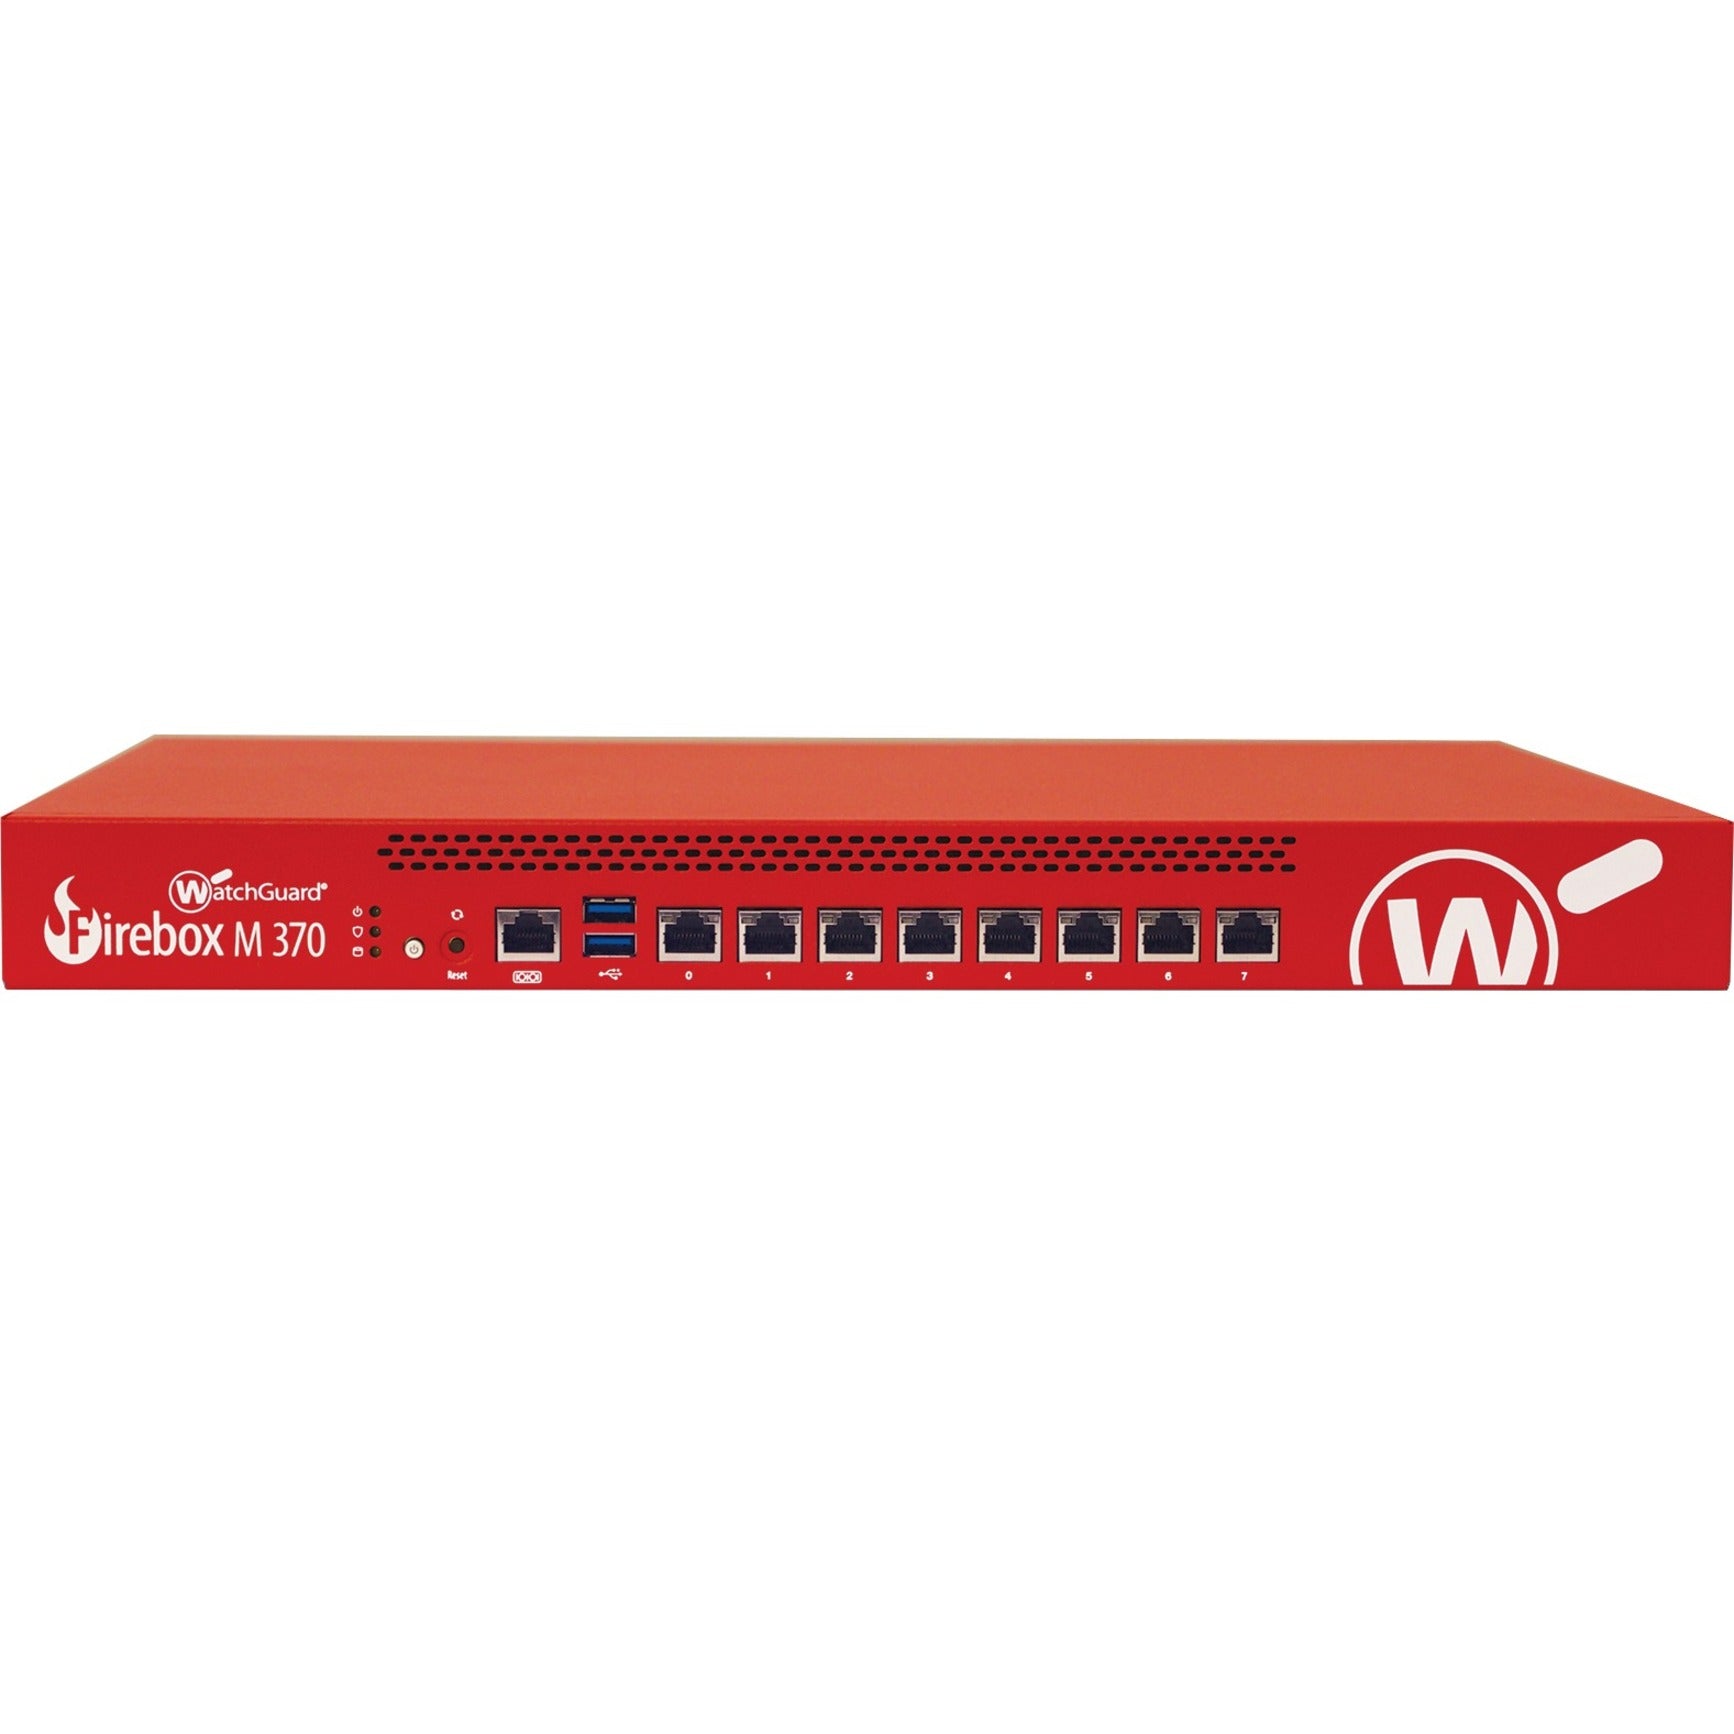 WatchGuard WGM37643 Firebox M370 Network Security/Firewall Appliance, 3-yr Total Security Suite